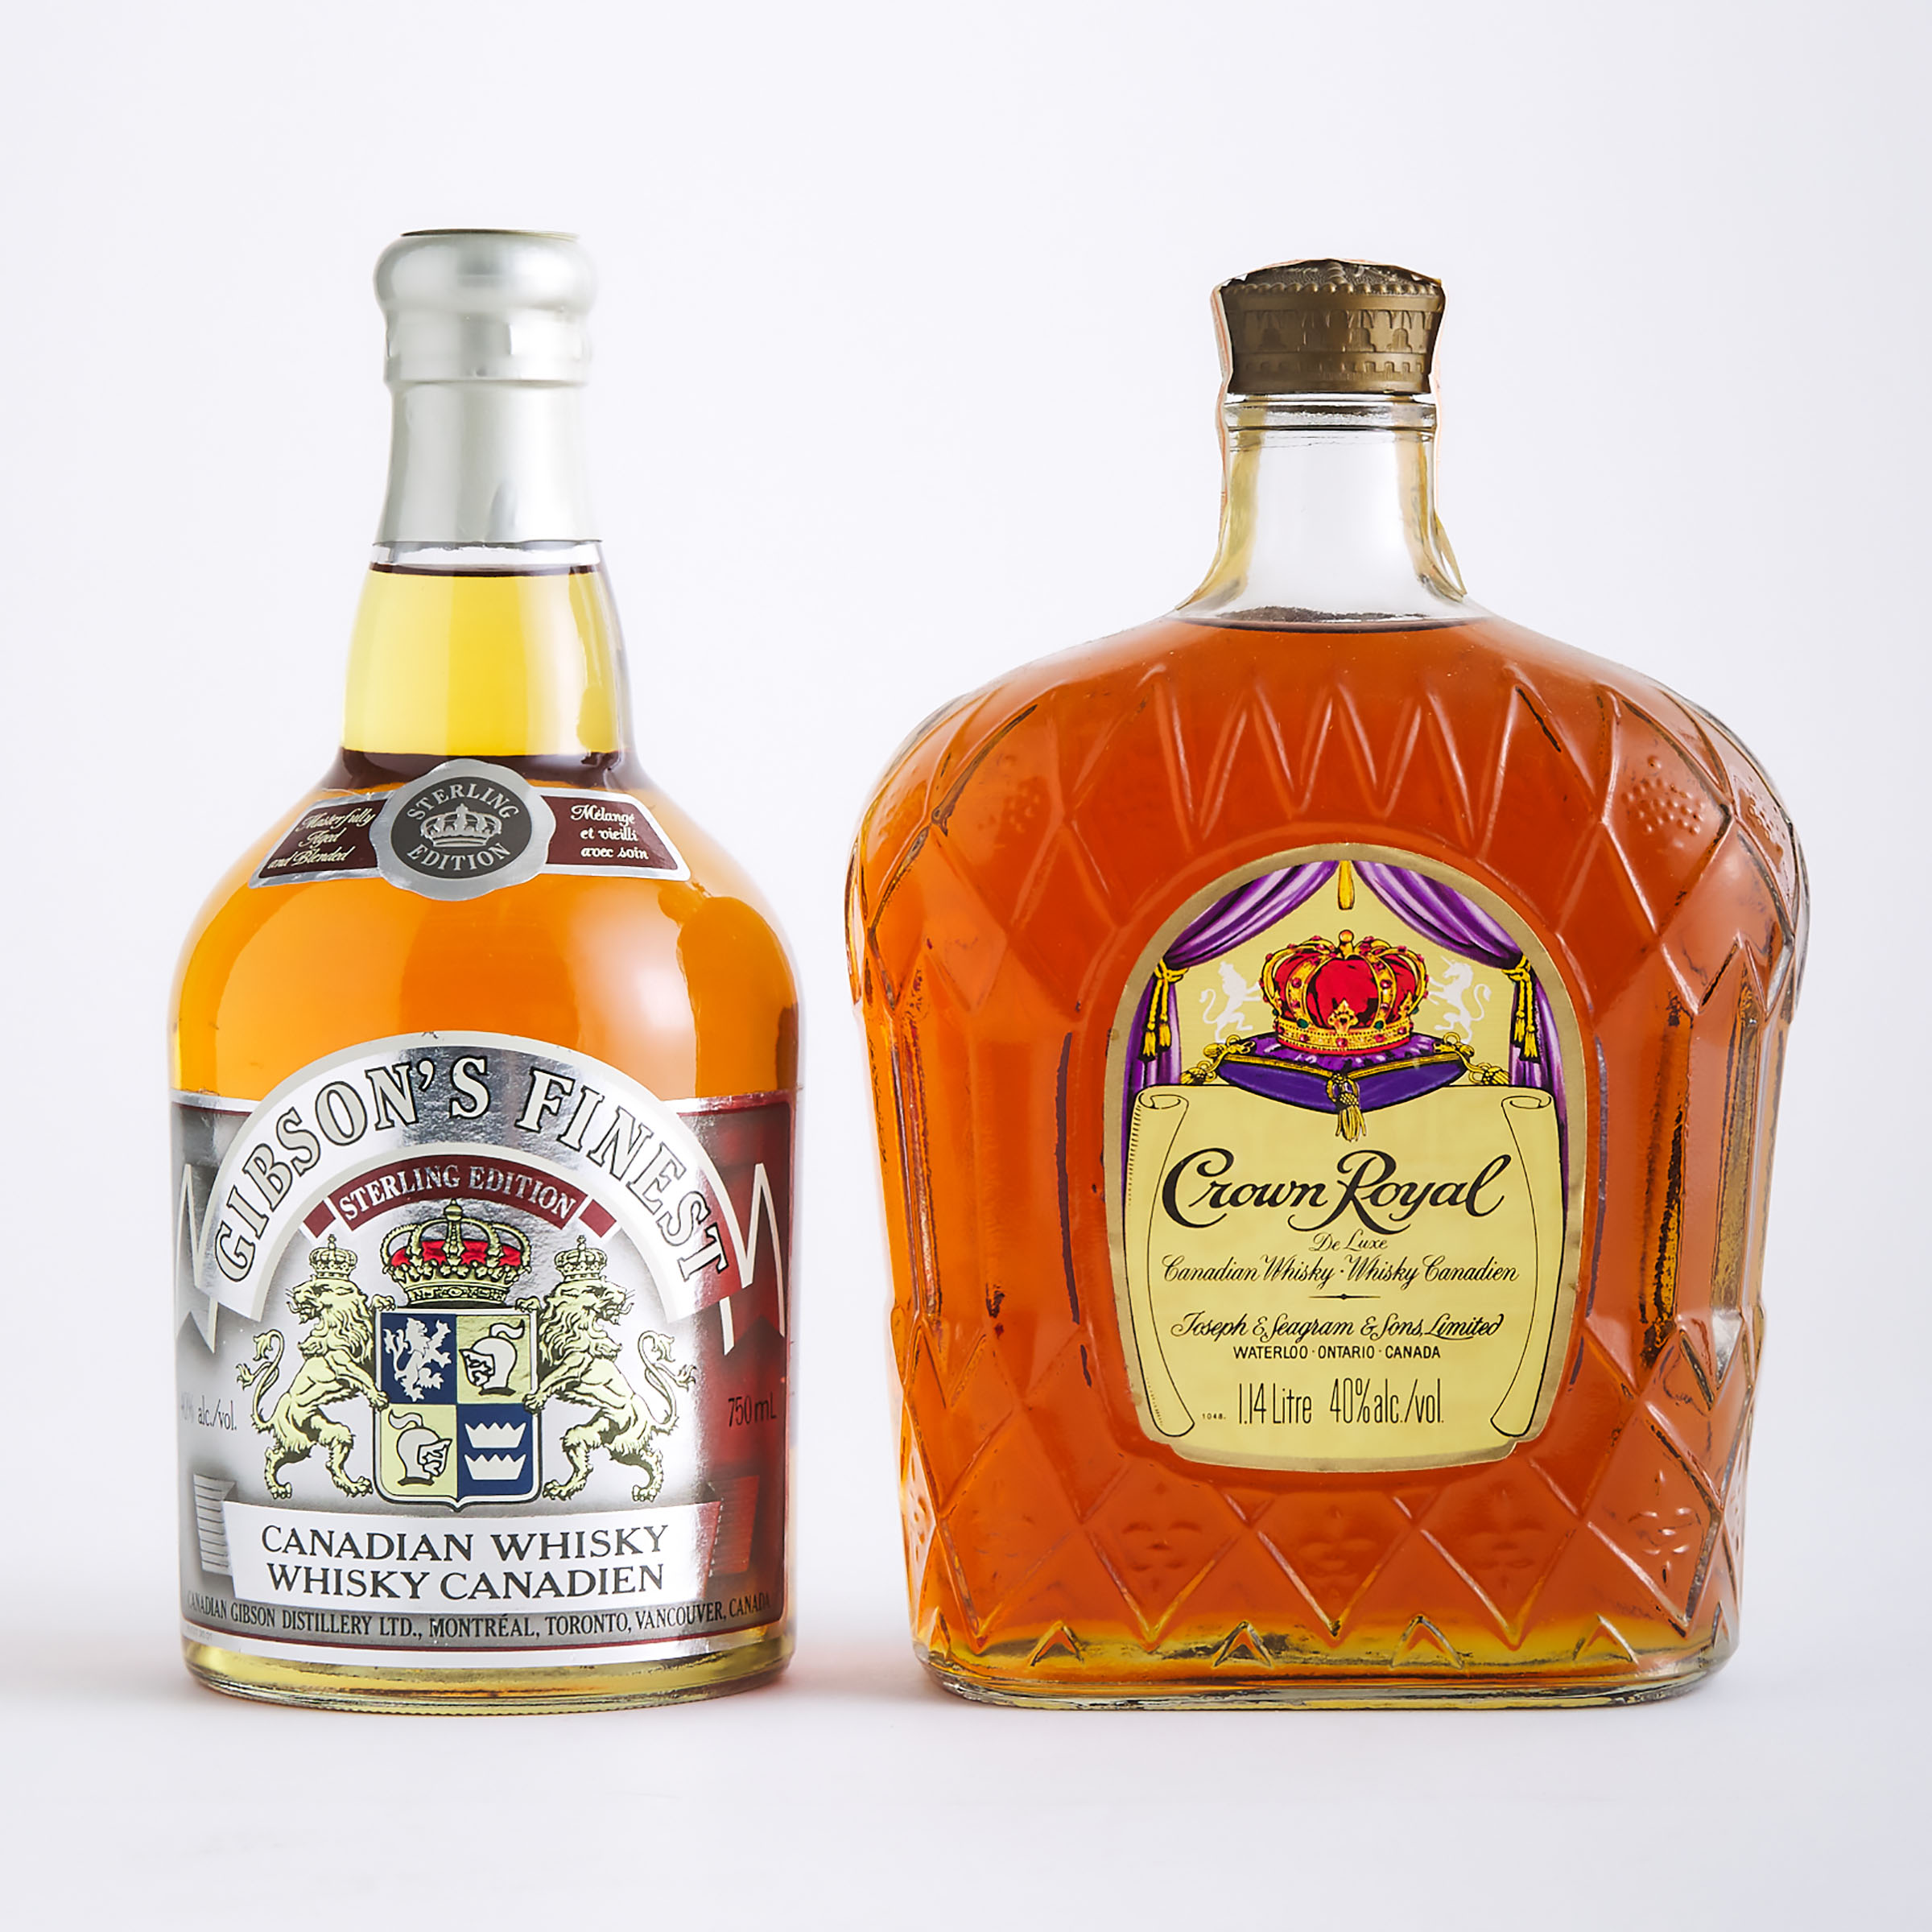 CROWN ROYAL DELUXE CANADIAN WHISKY (ONE 1.14L)
GIBSON'S FINEST CANADIAN WHISKY (ONE 750 ML)